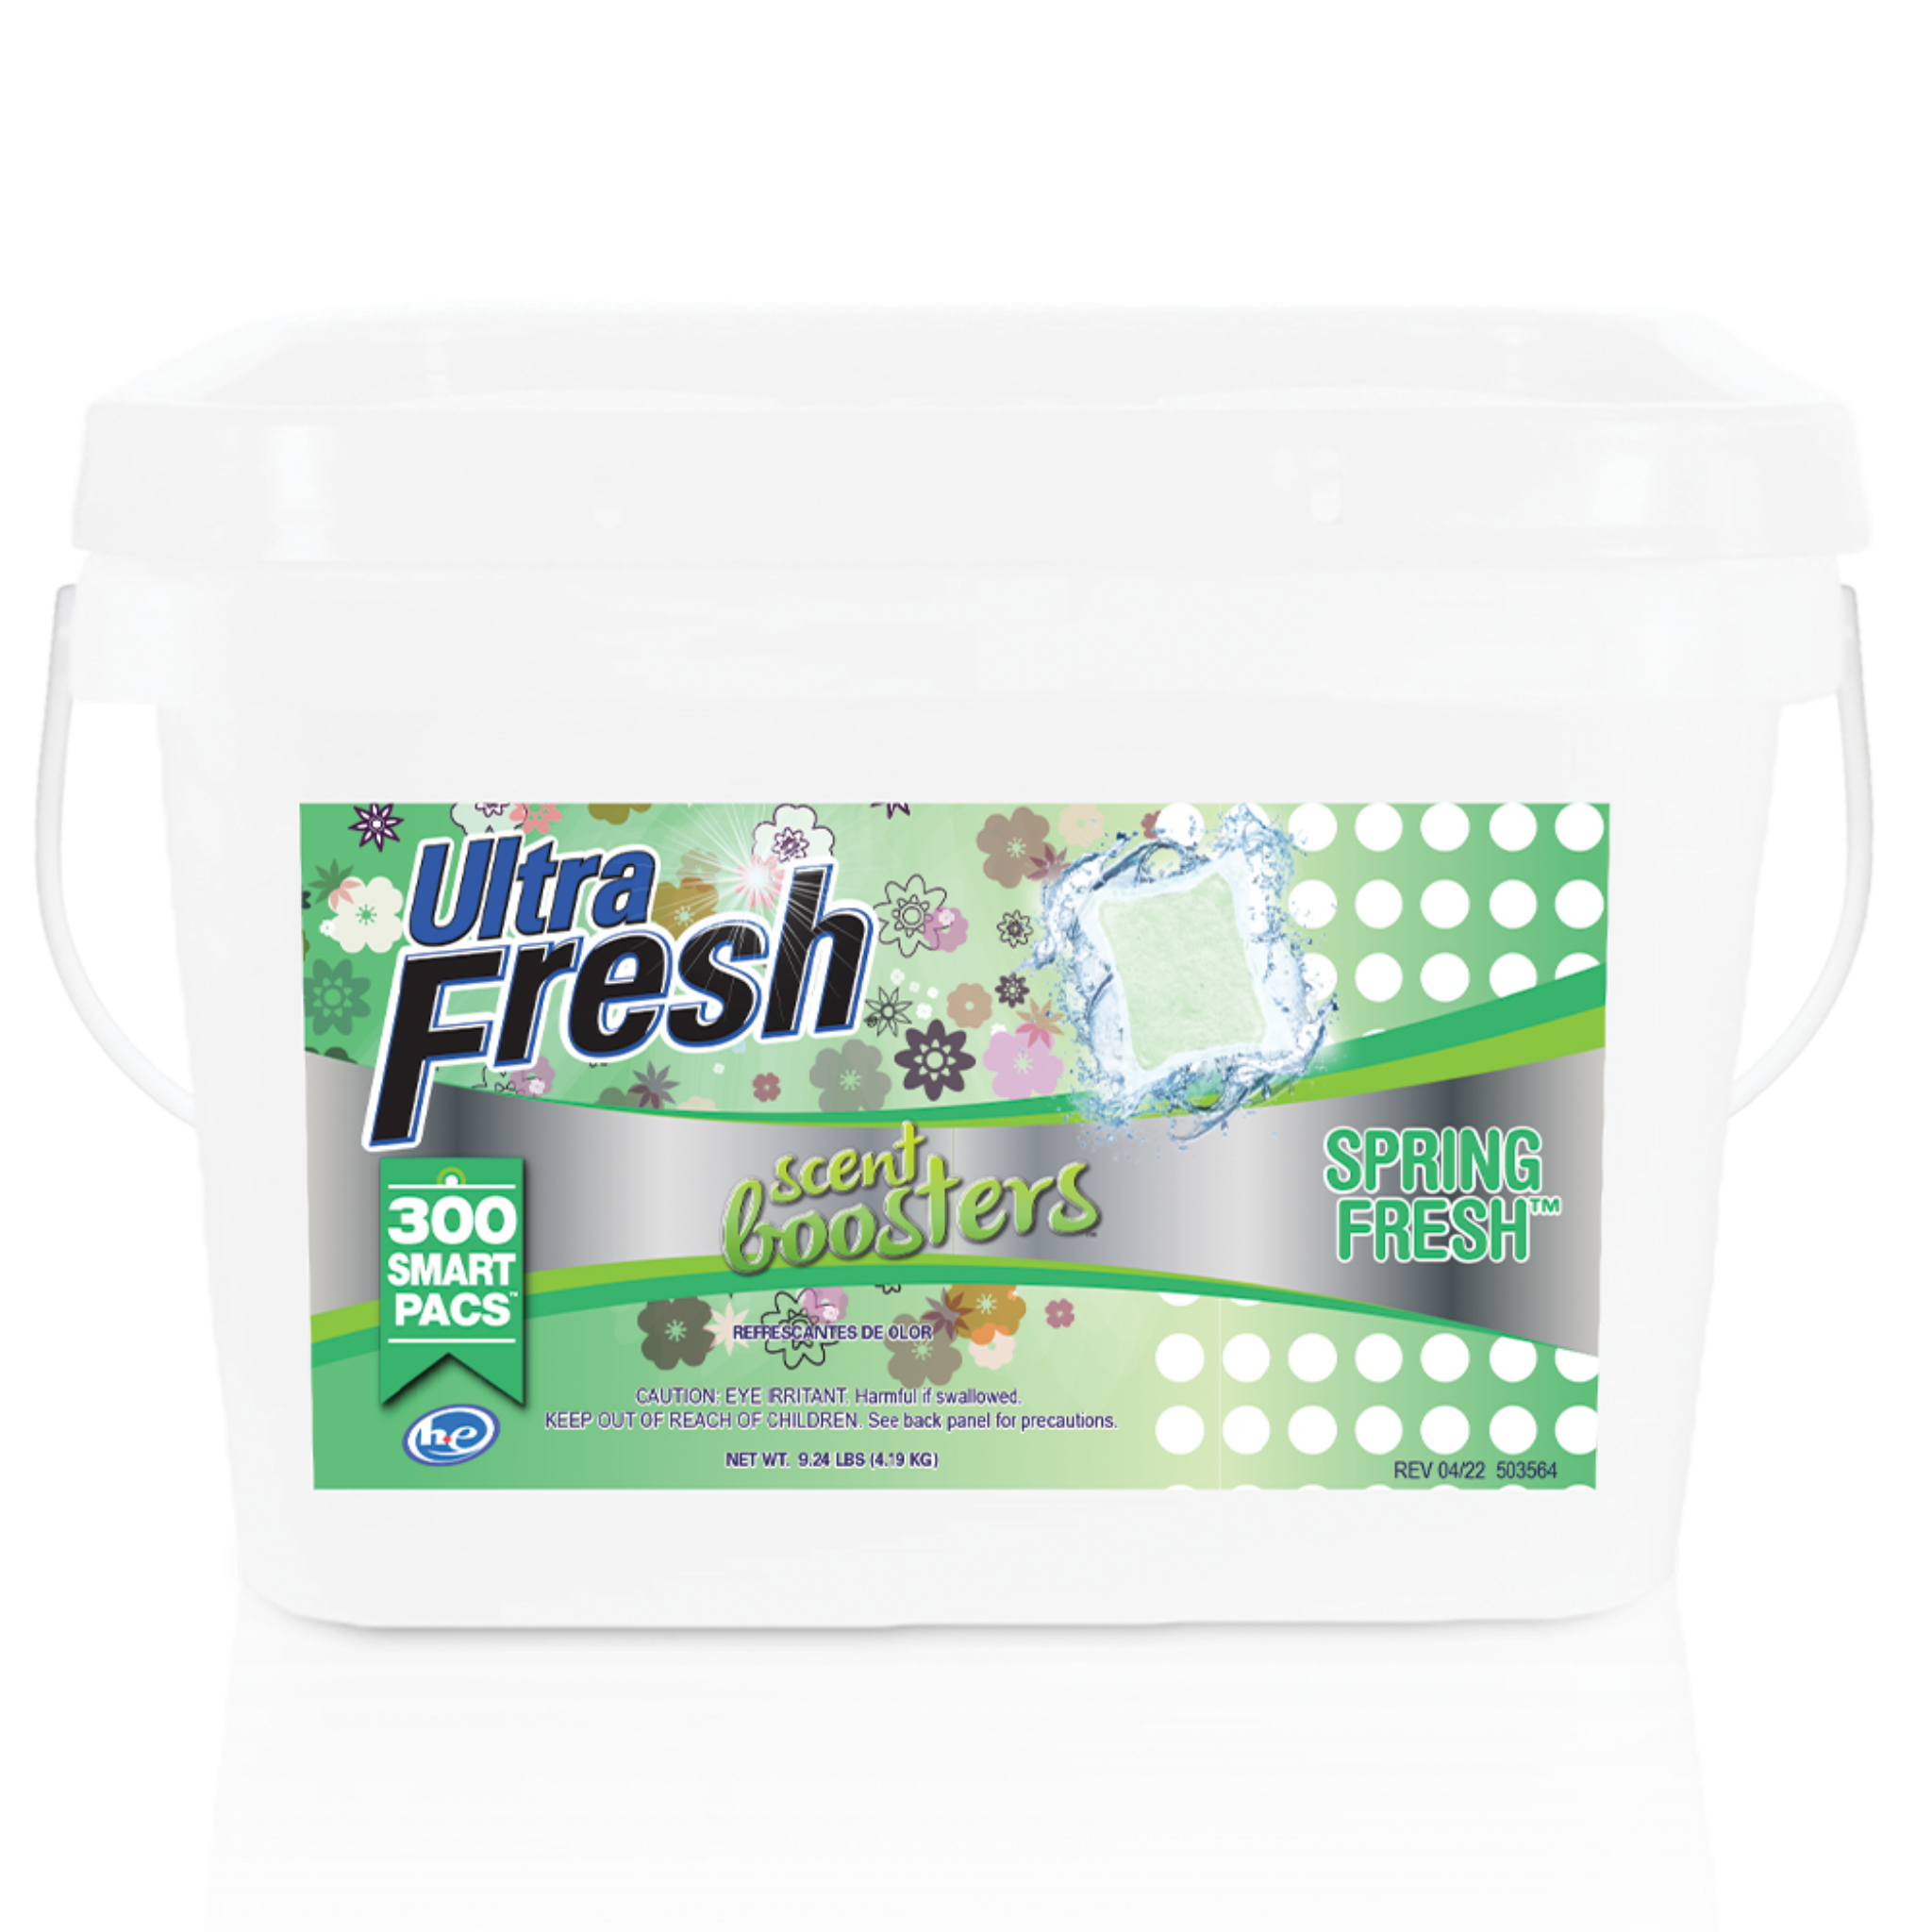 Ultra Fresh Scent Booster SmartPacs Spring Fresh- 300 Count